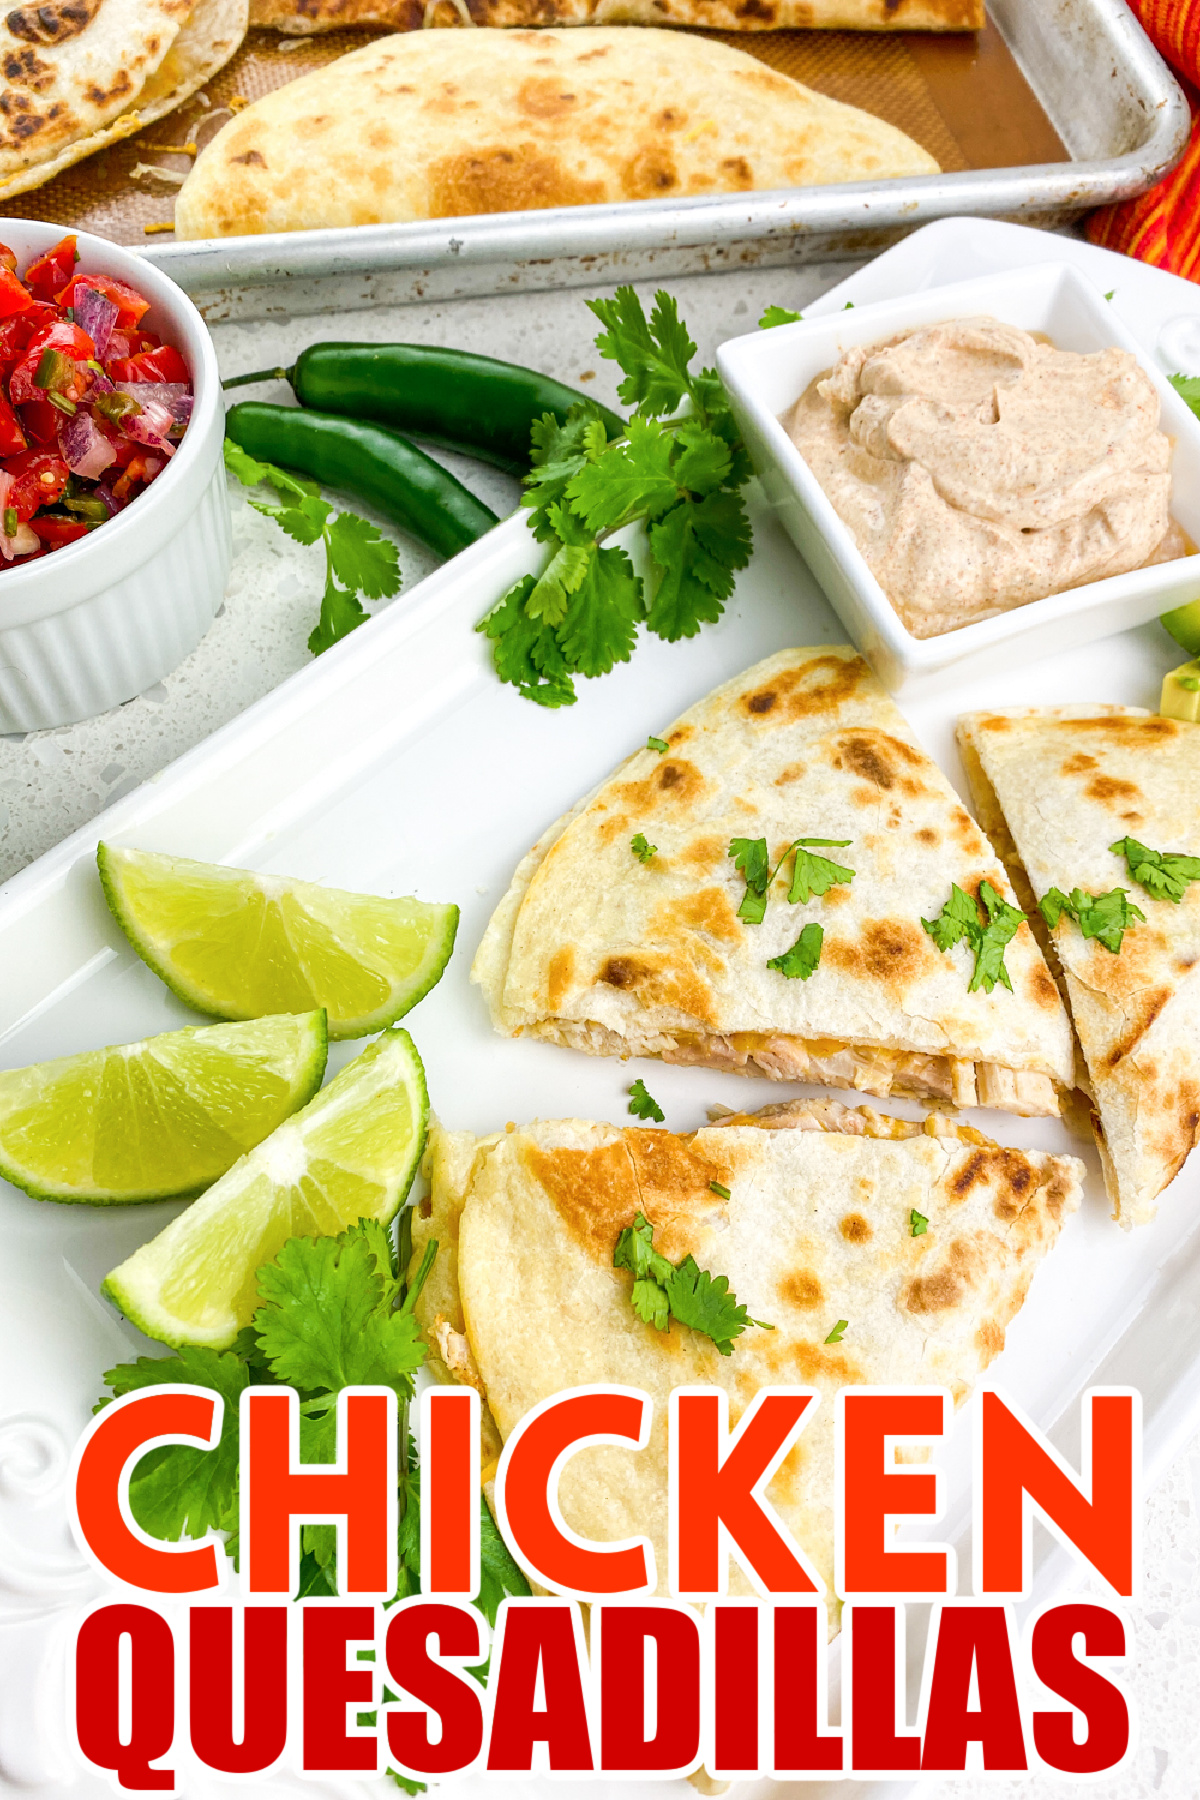 Chicken quesadillas are an easy, satisfying meal the whole family will love. This chicken quesadilla recipe makes a quick weeknight dinner.